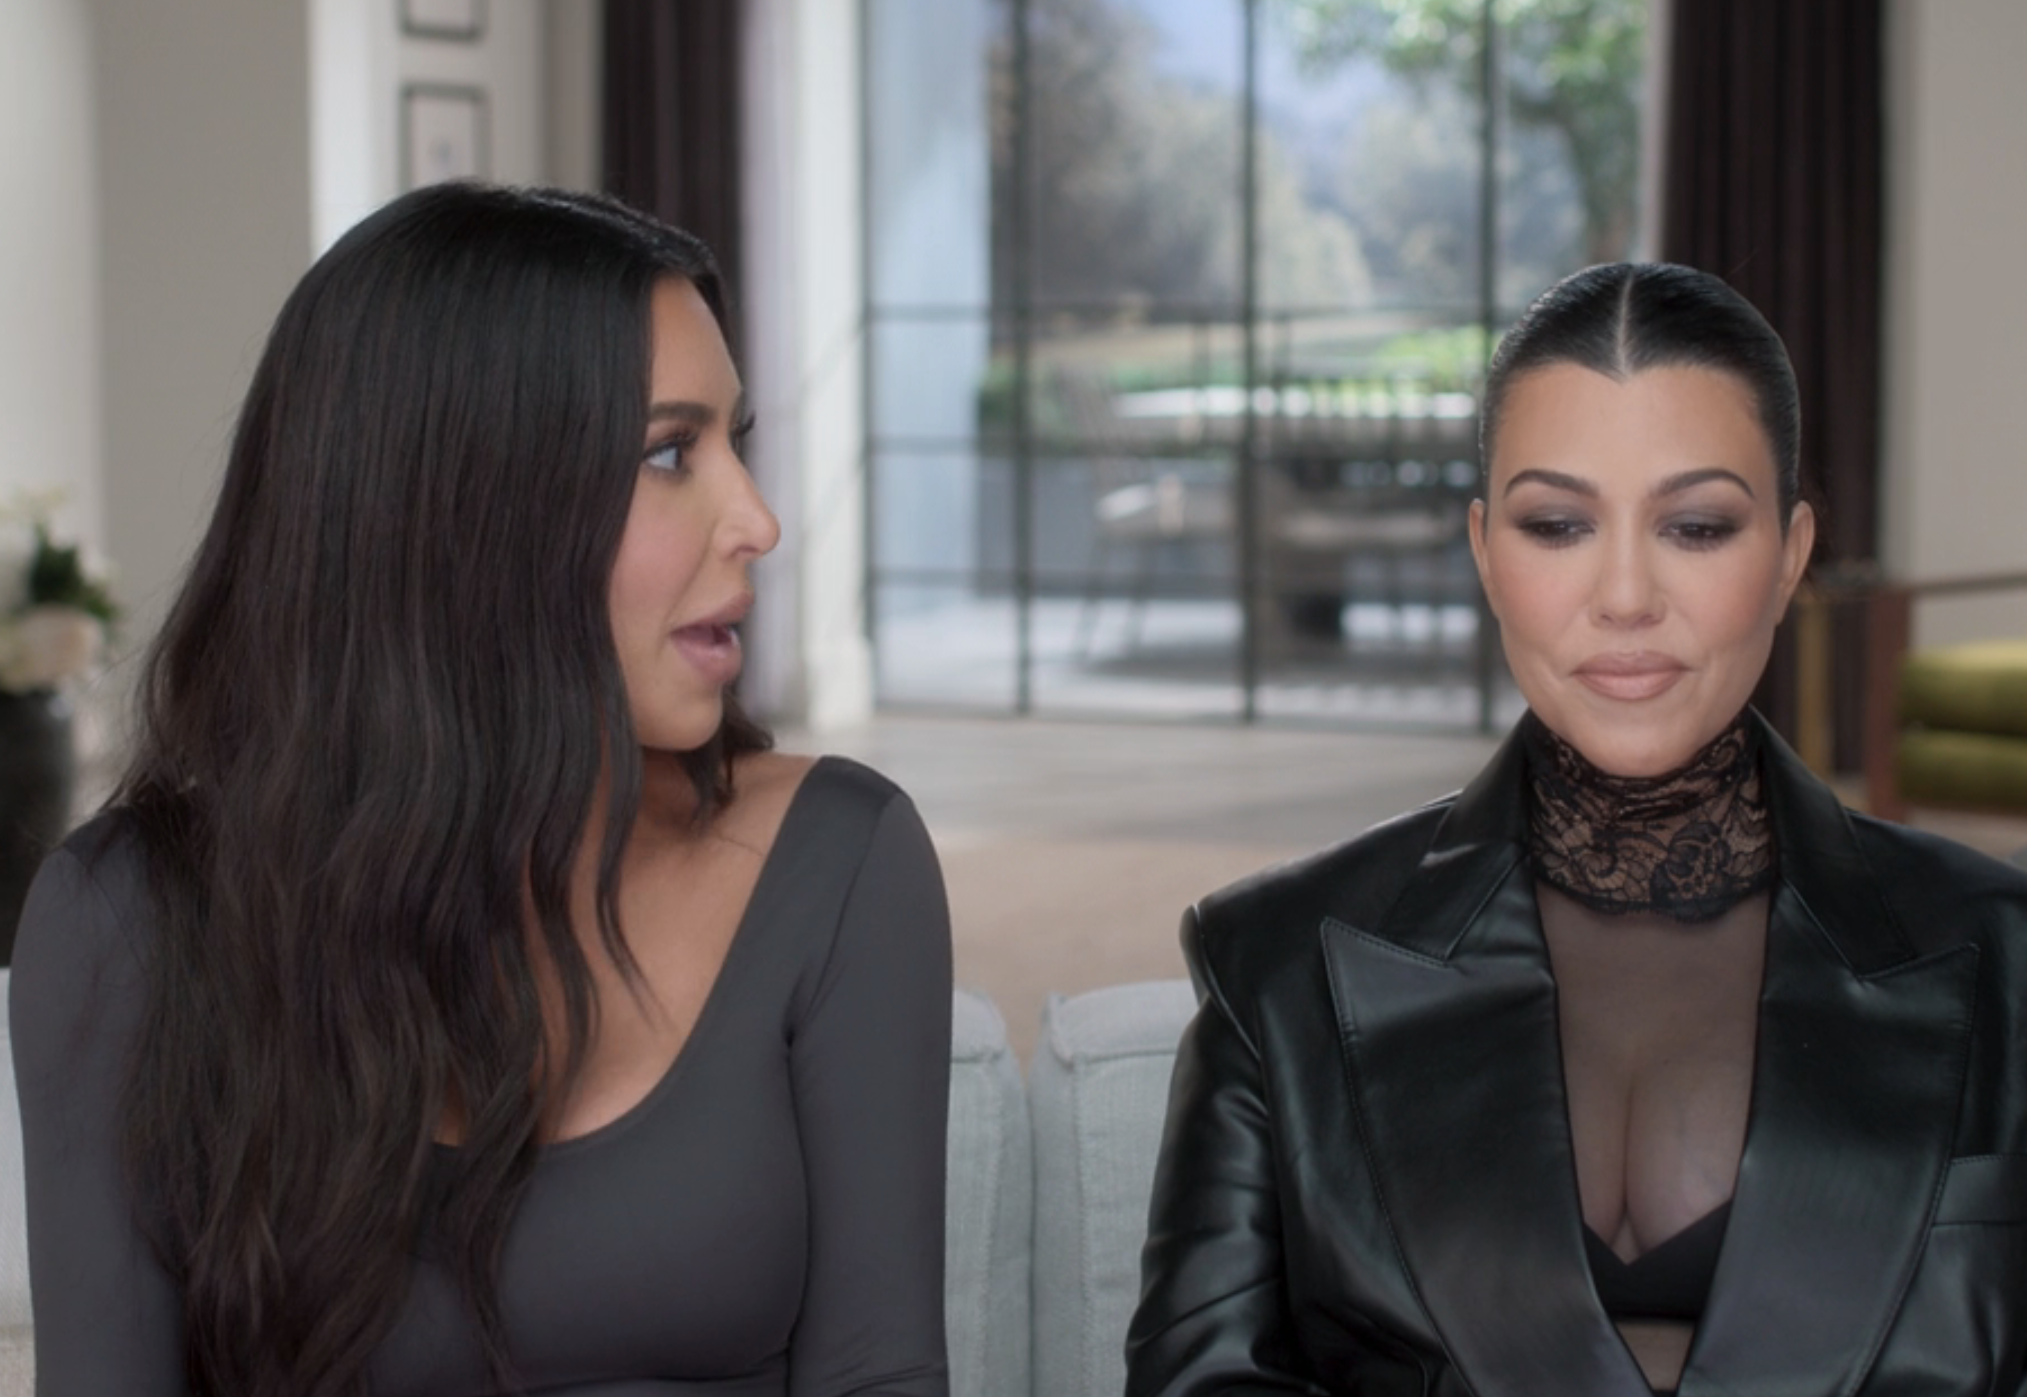 Close-up of Kim and Kourtney sitting together